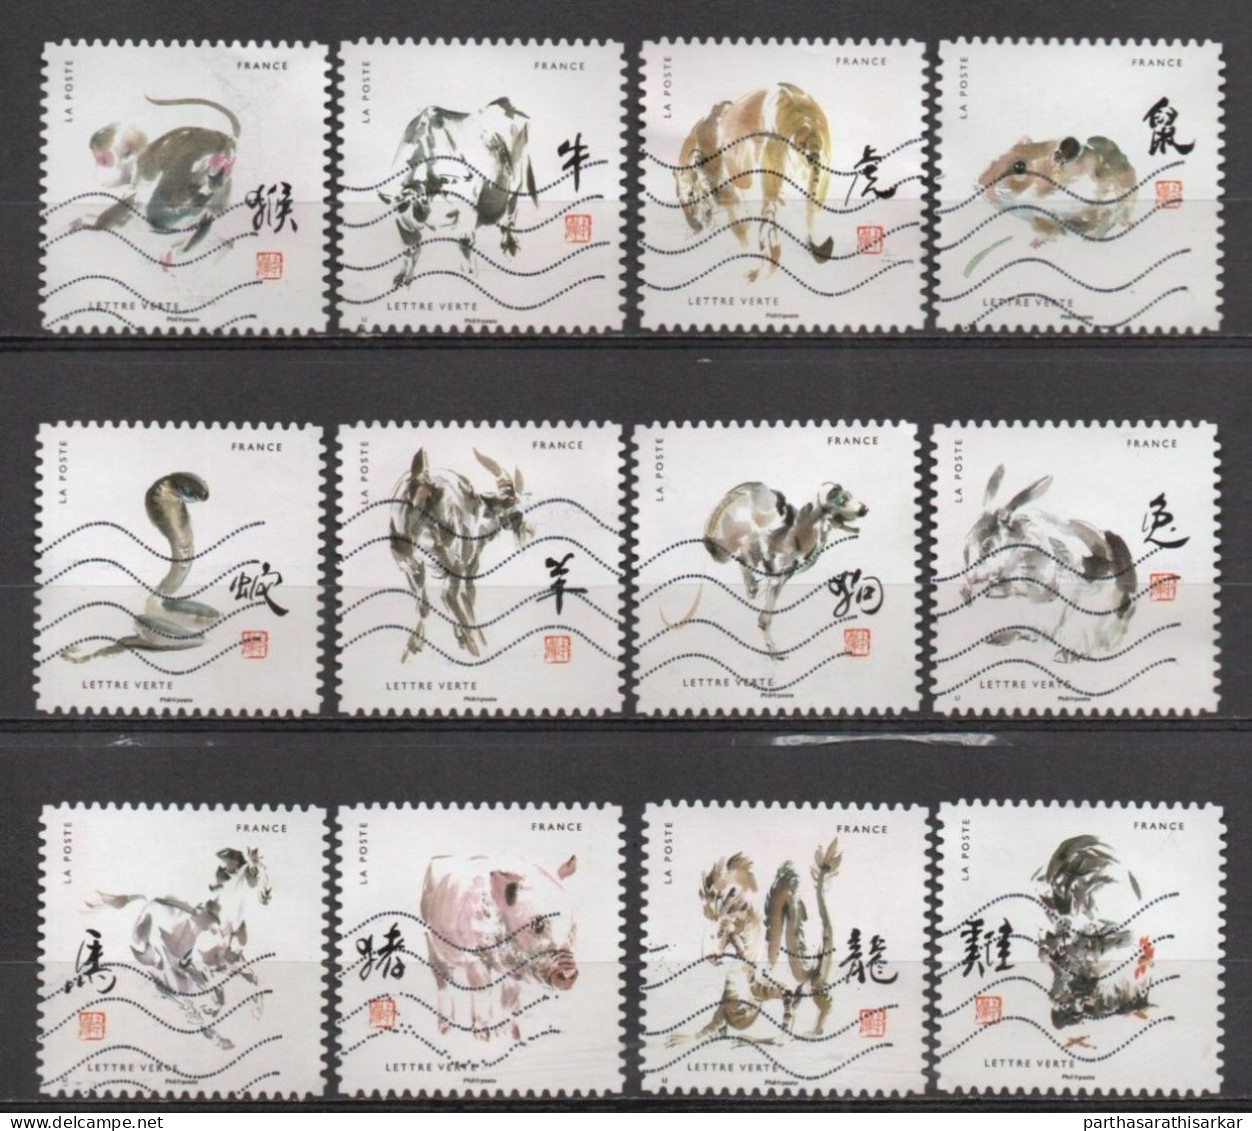 FRANCE 2017 CHINESE ZODIAC SIGNS COMPLETE SET USED RARE - Oblitérés